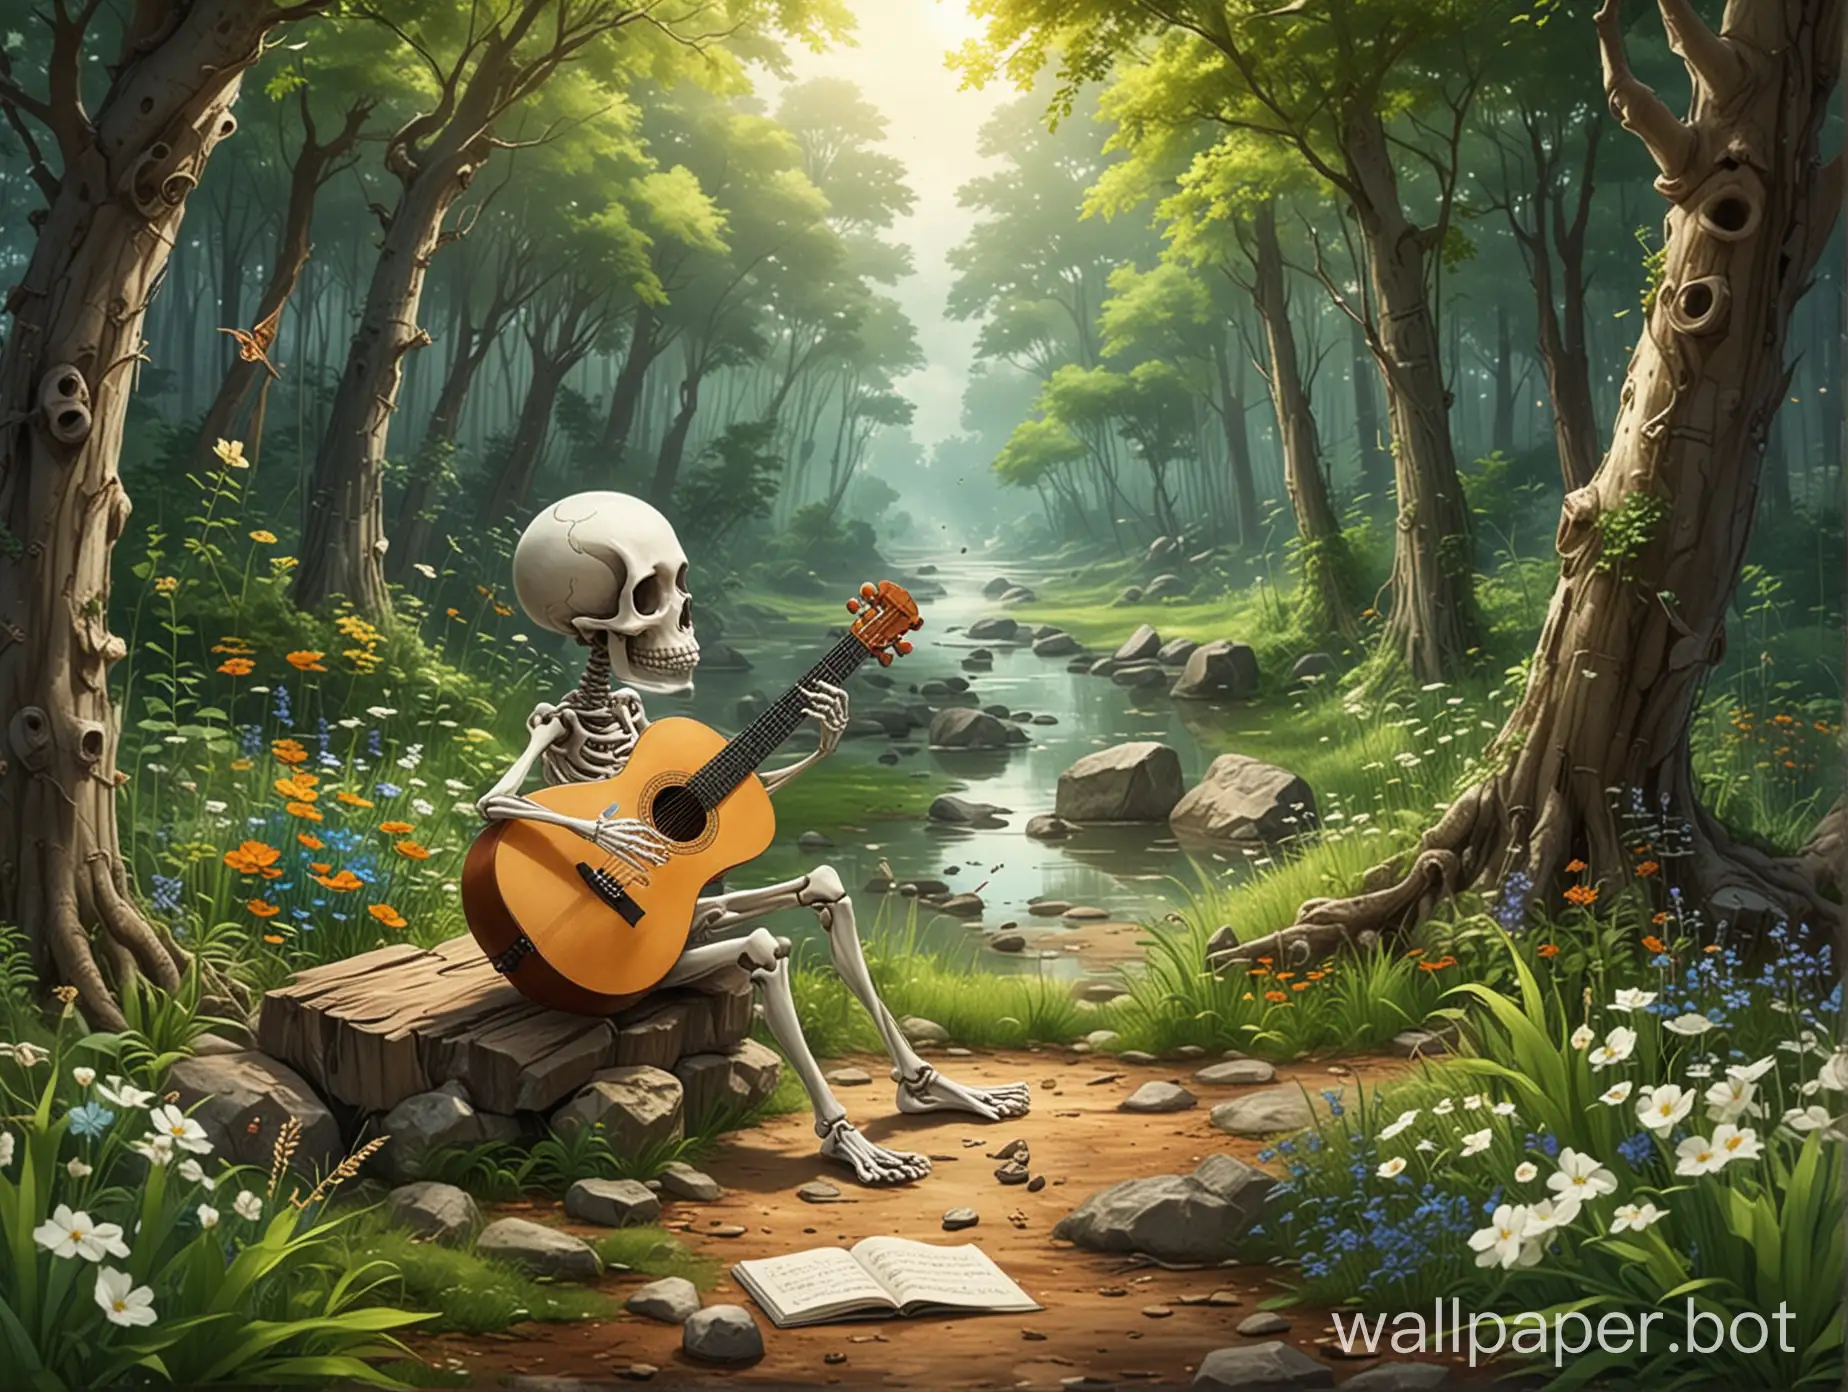 Anime-Skeleton-Relaxing-in-Nature-with-Musical-Humming